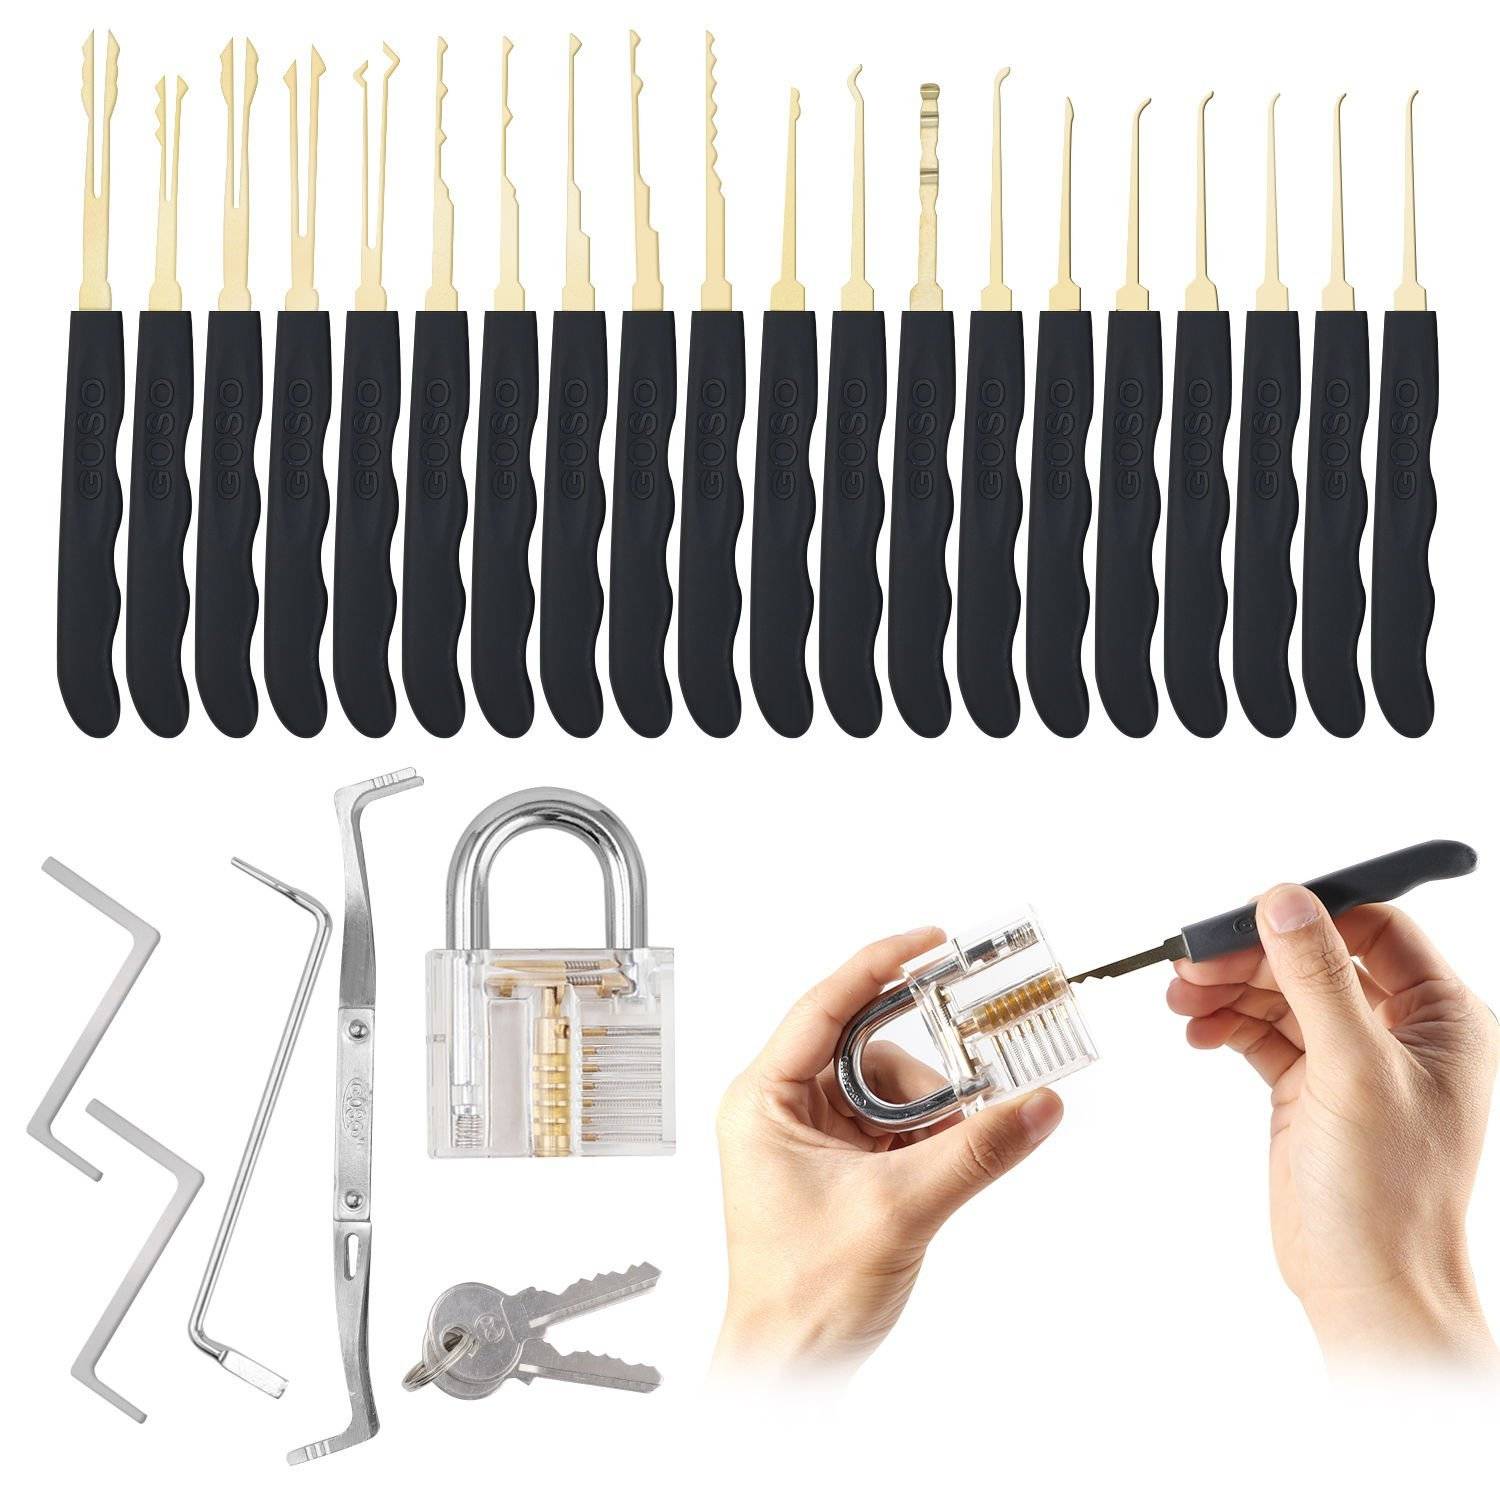 Goso Lock Pick Set with tension tools